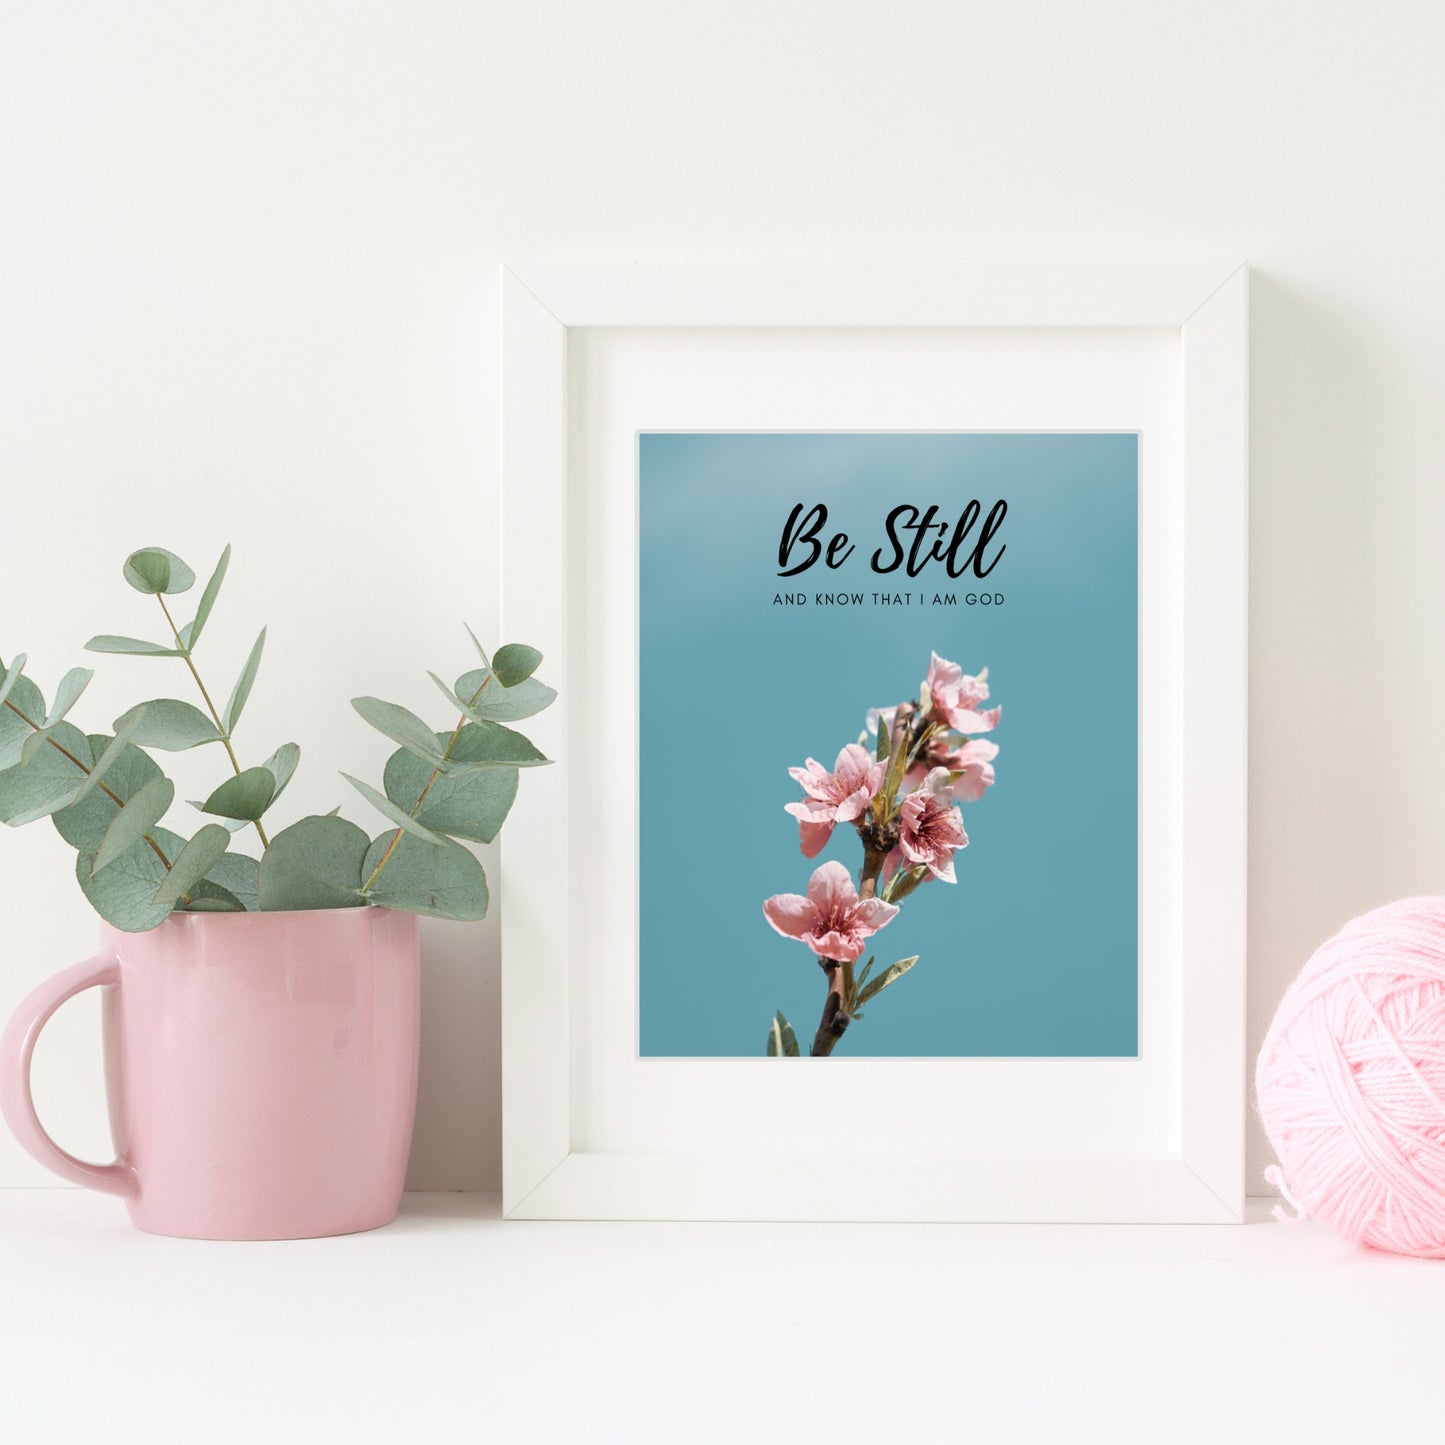 Inspirational Word Art - Be Still and know that I am God - Flower Design Wall Decor (8X10 print) choose from 2 text colors | shown with black text in a white frame | oak7west.com